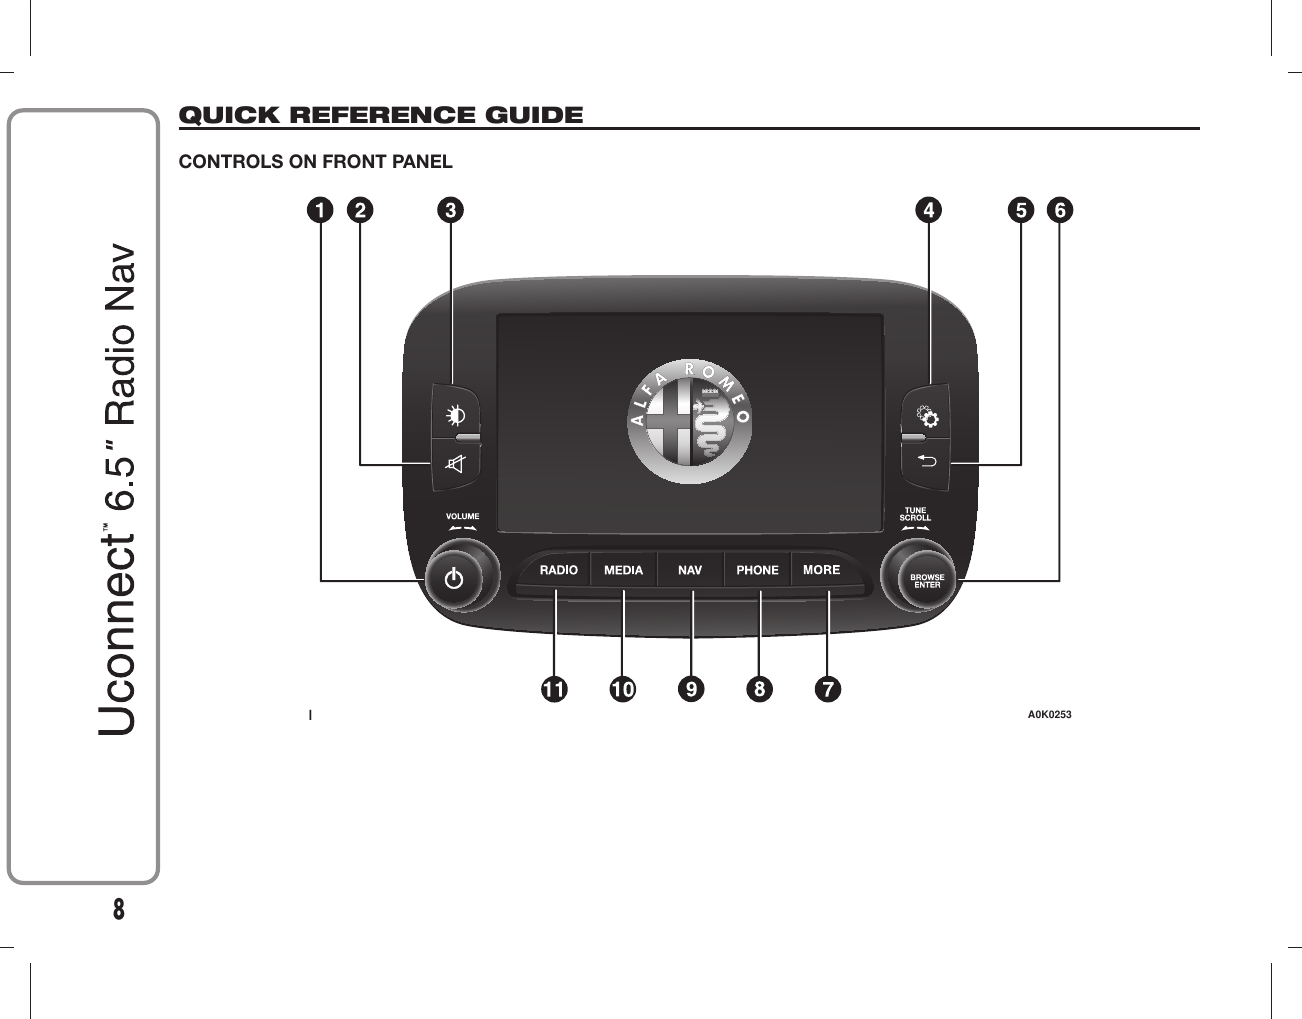 QUICK REFERENCE GUIDECONTROLS ON FRONT PANEL1A0K02538